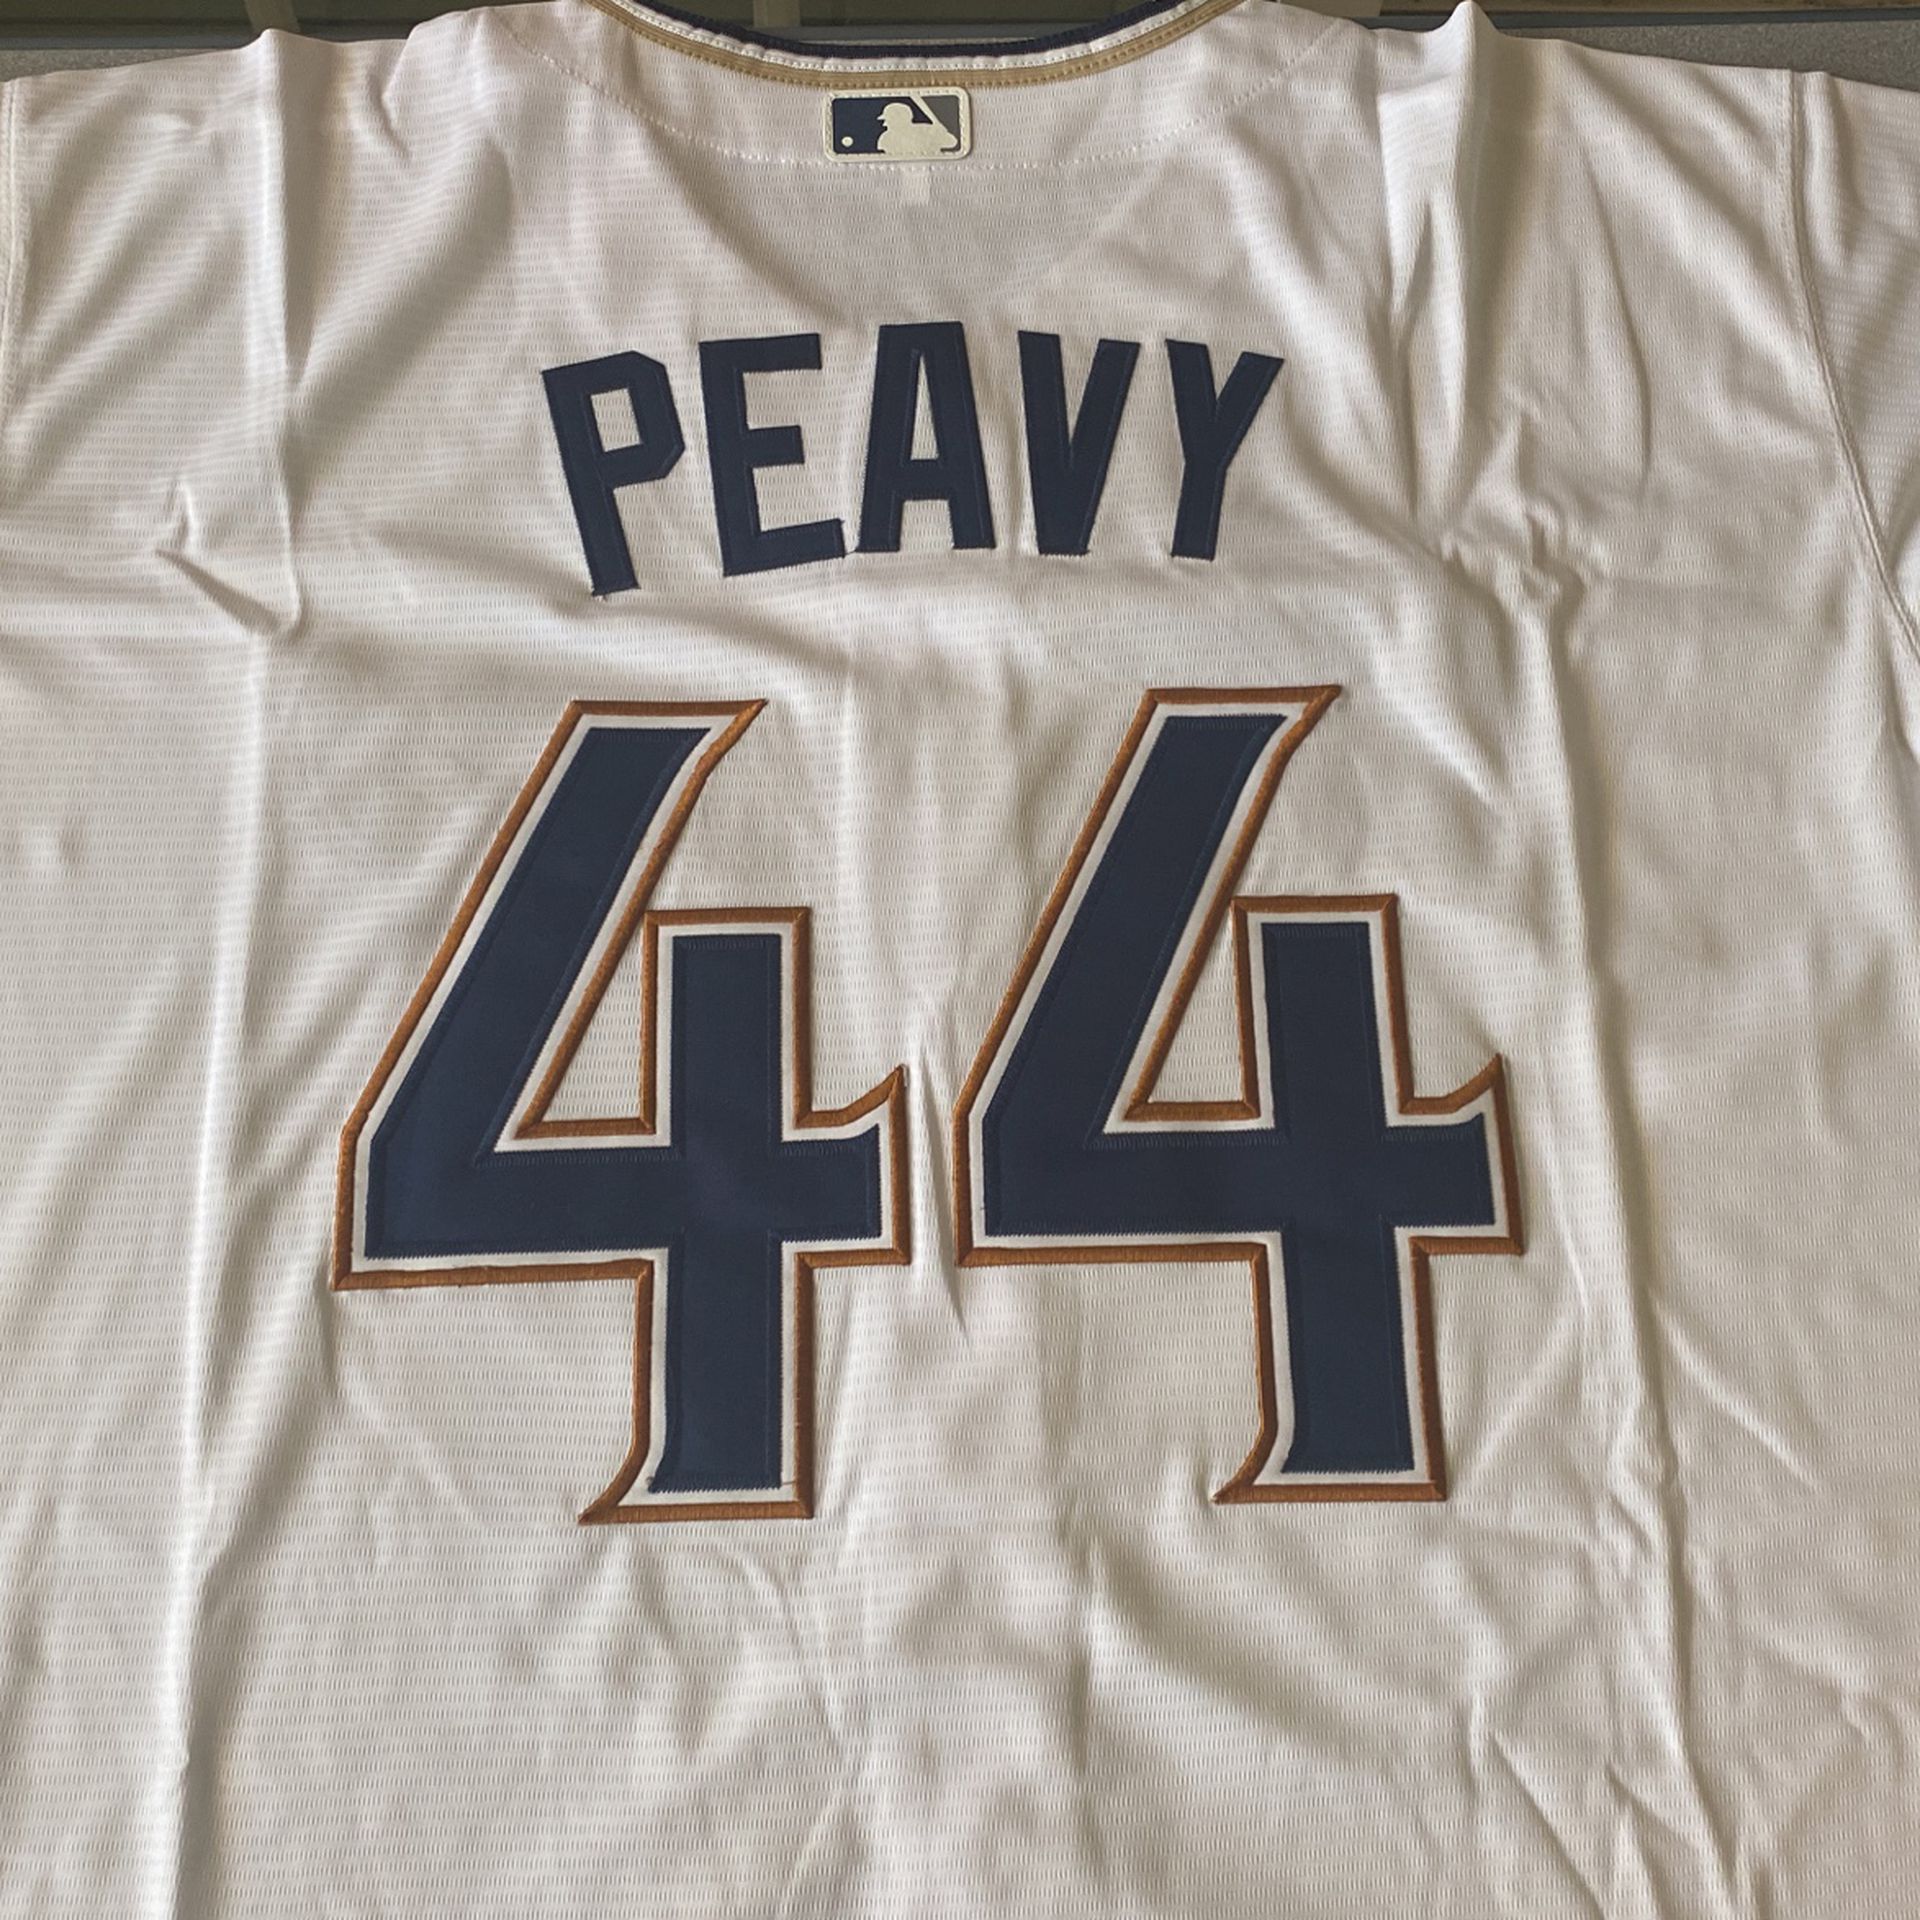 (New) Classic San Diego Padres Jersey for Sale in San Diego, CA